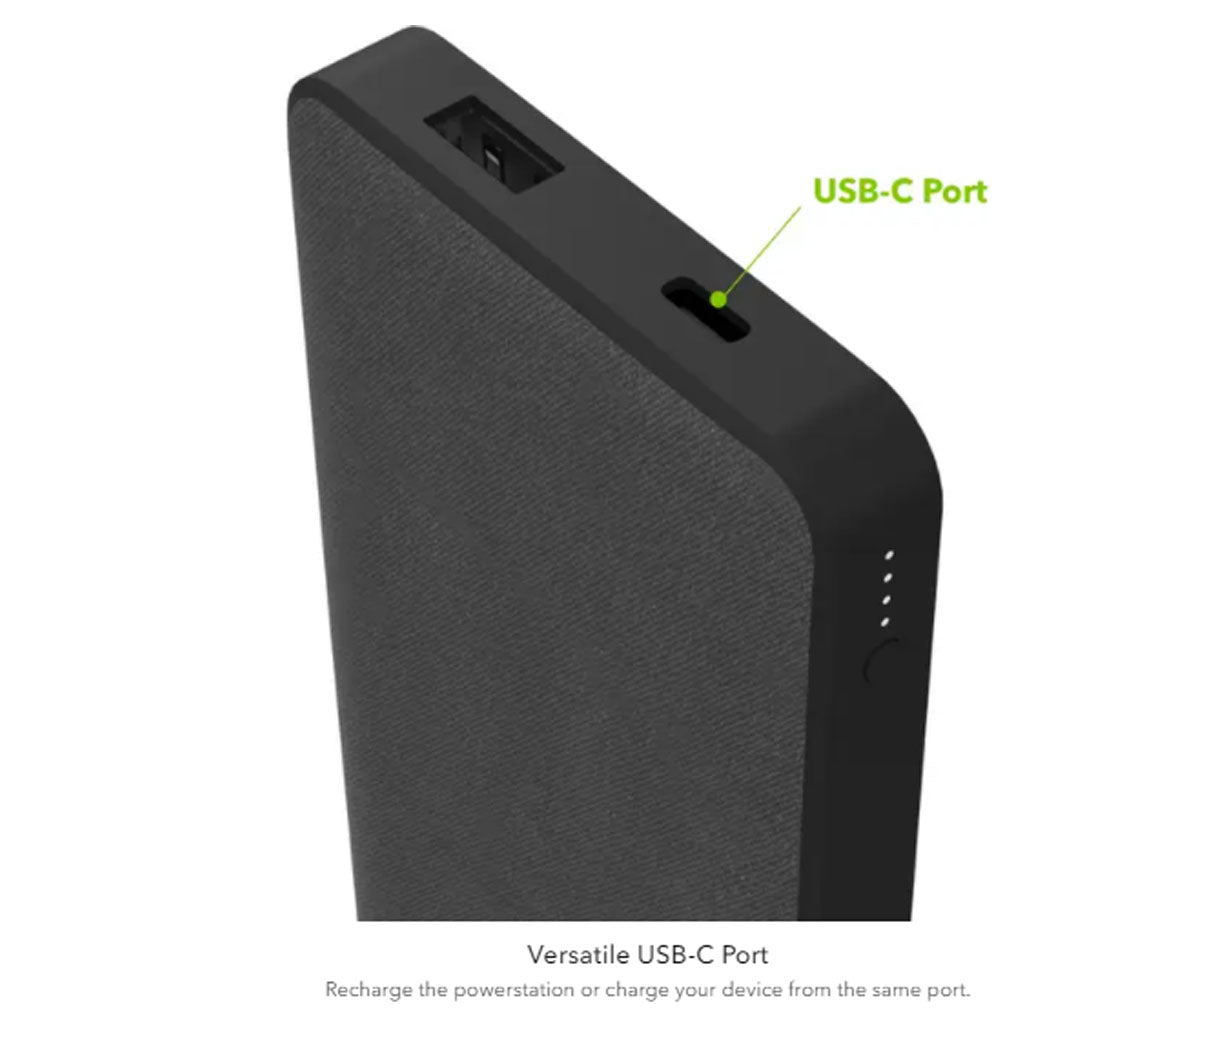 Mophie Powerstation 10,000mAh PD 18W USB-C PD fast charge Powerbank (Fabric) - Black ( Barcode: 840056127555 )